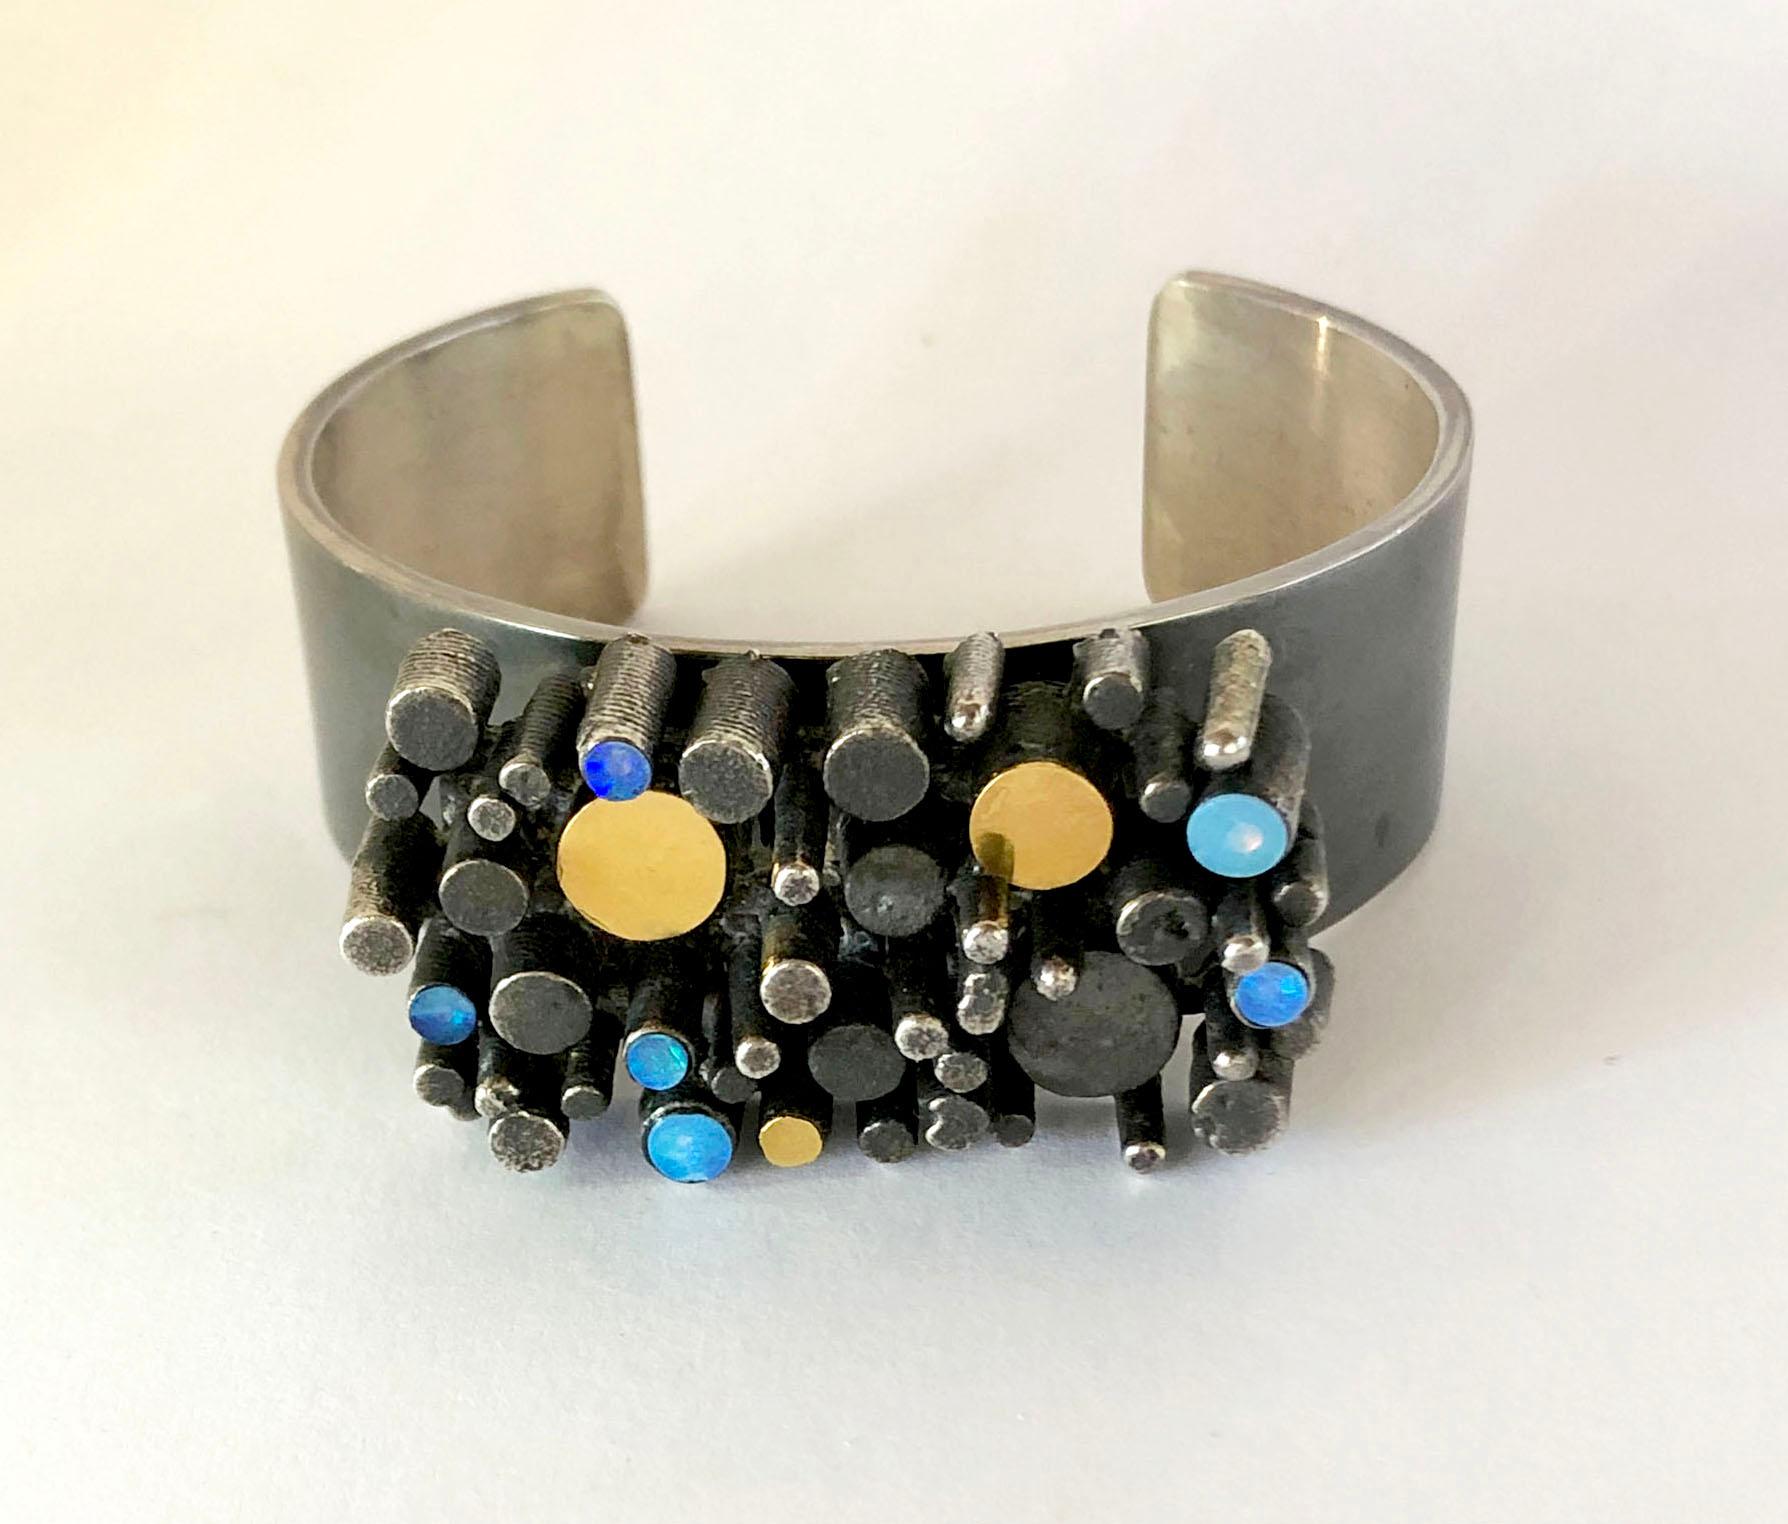 Oxidized sterling silver, gilt and opal bracelet created by Danish modern jeweler, Thor Selzer, circa 1960s.  Bracelet measures 7